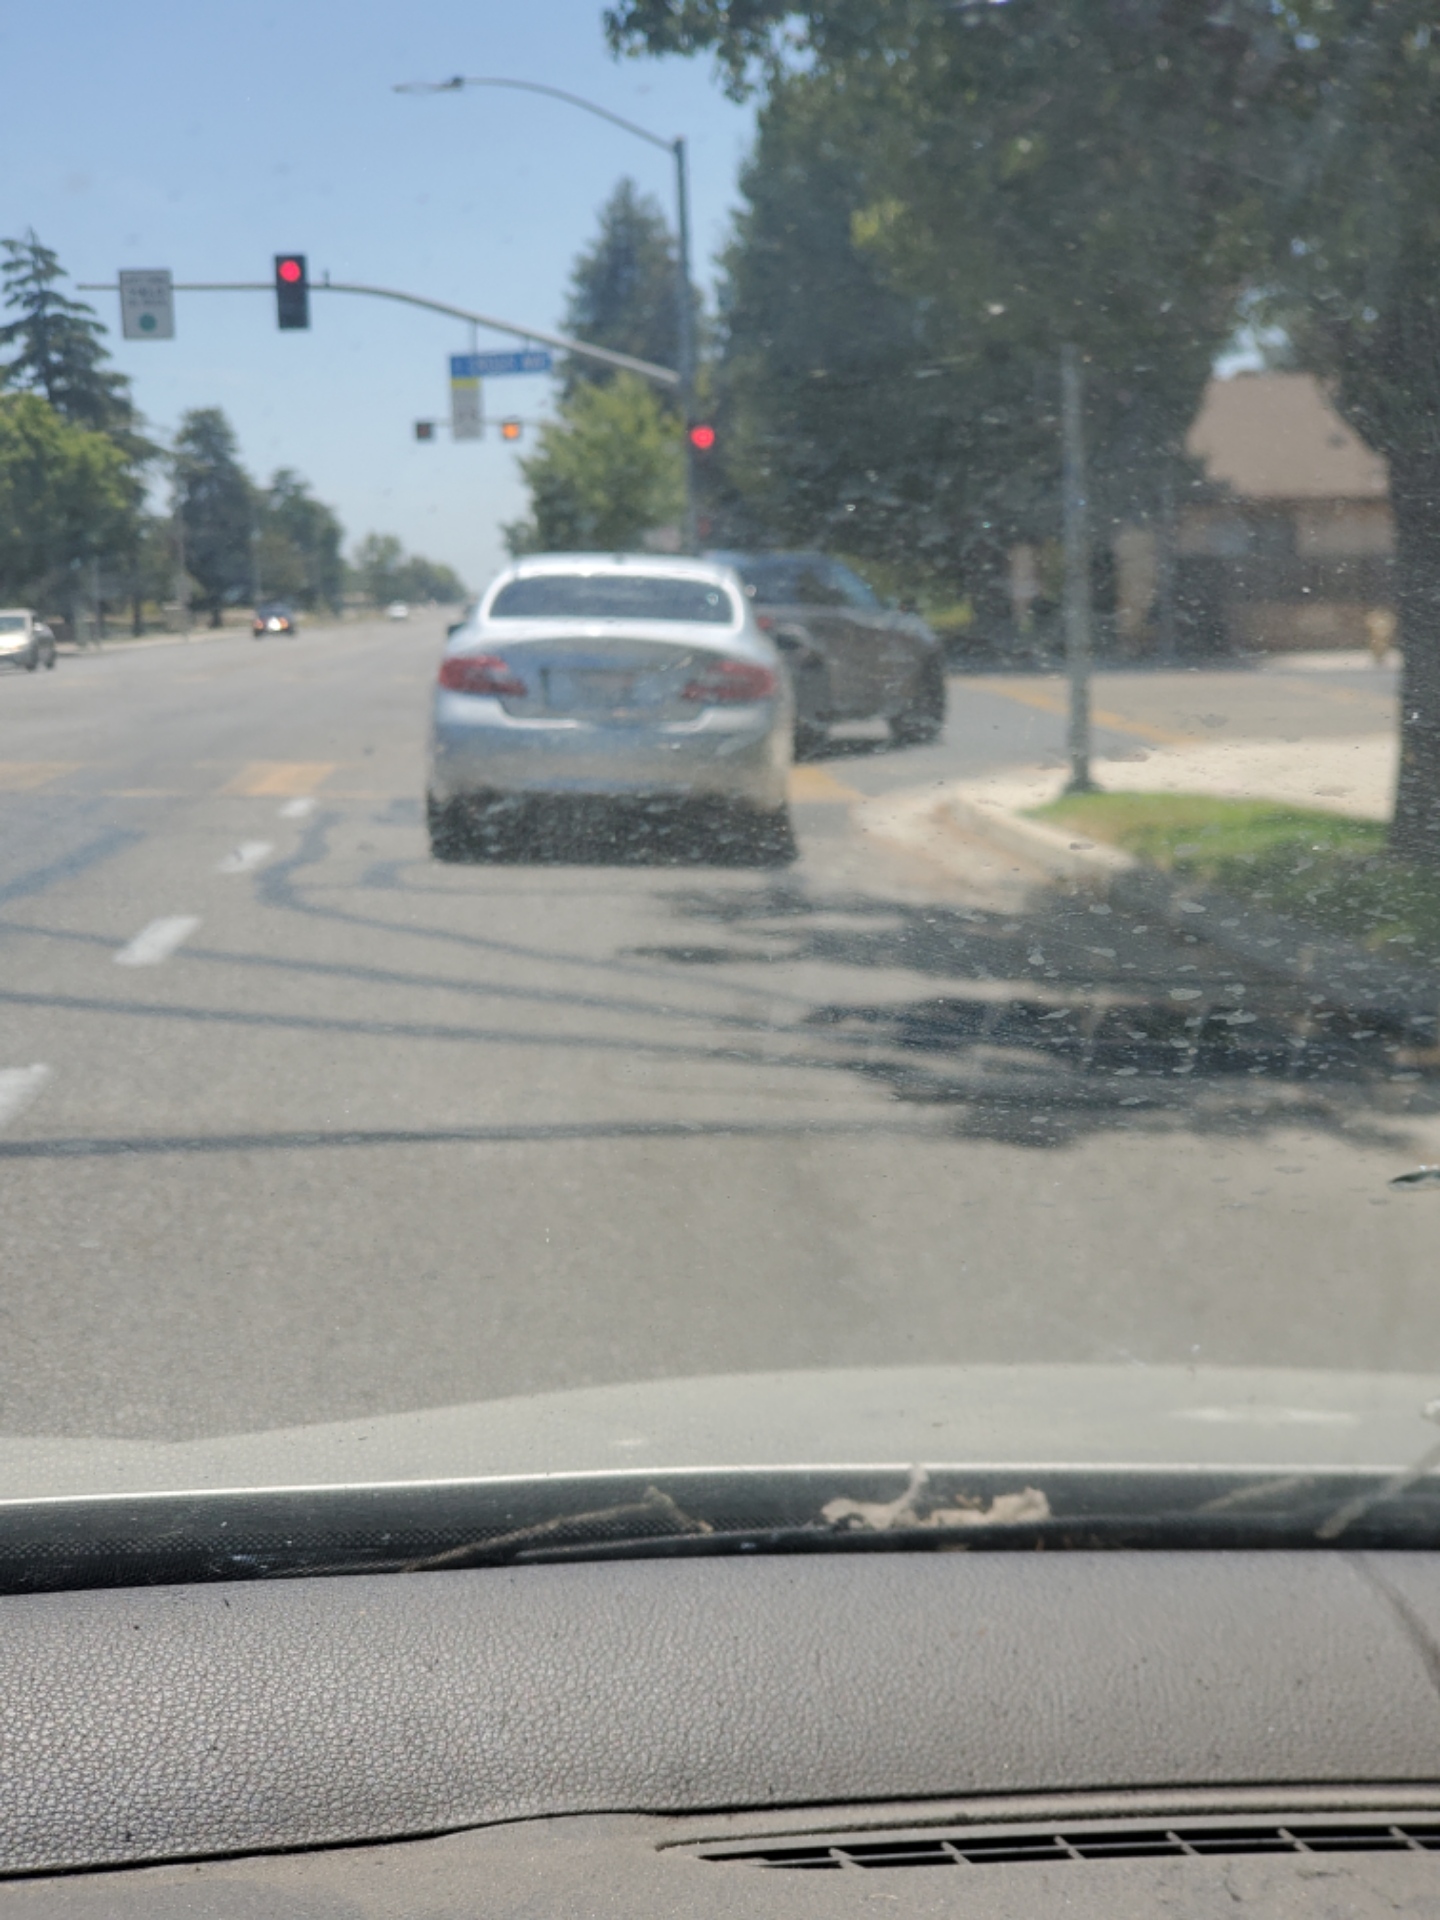 Dirty windshield, need license plate number | Scrolller